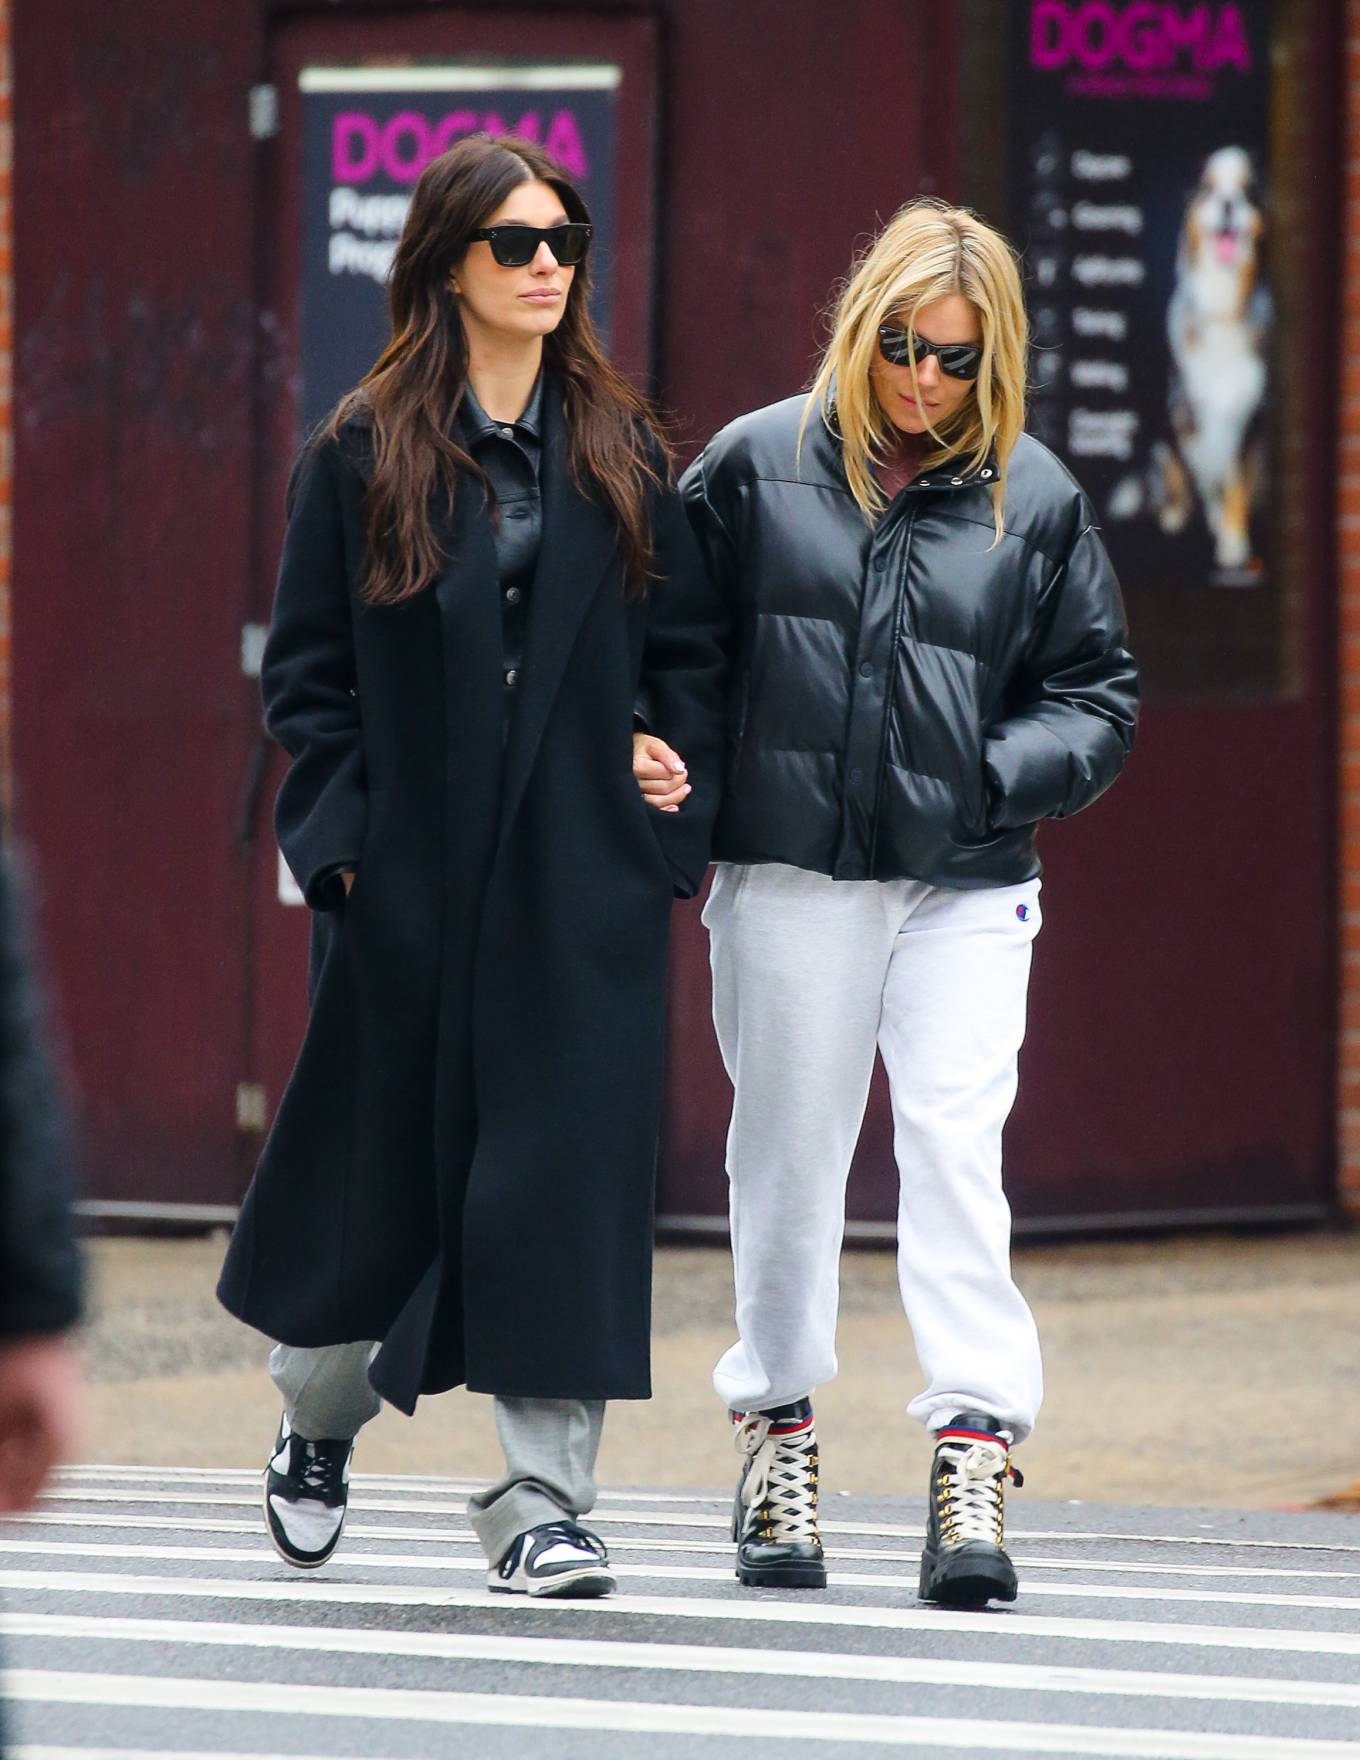 Sienna Miller - With Camila Morrone and Diane Kruger on a stroll in New York